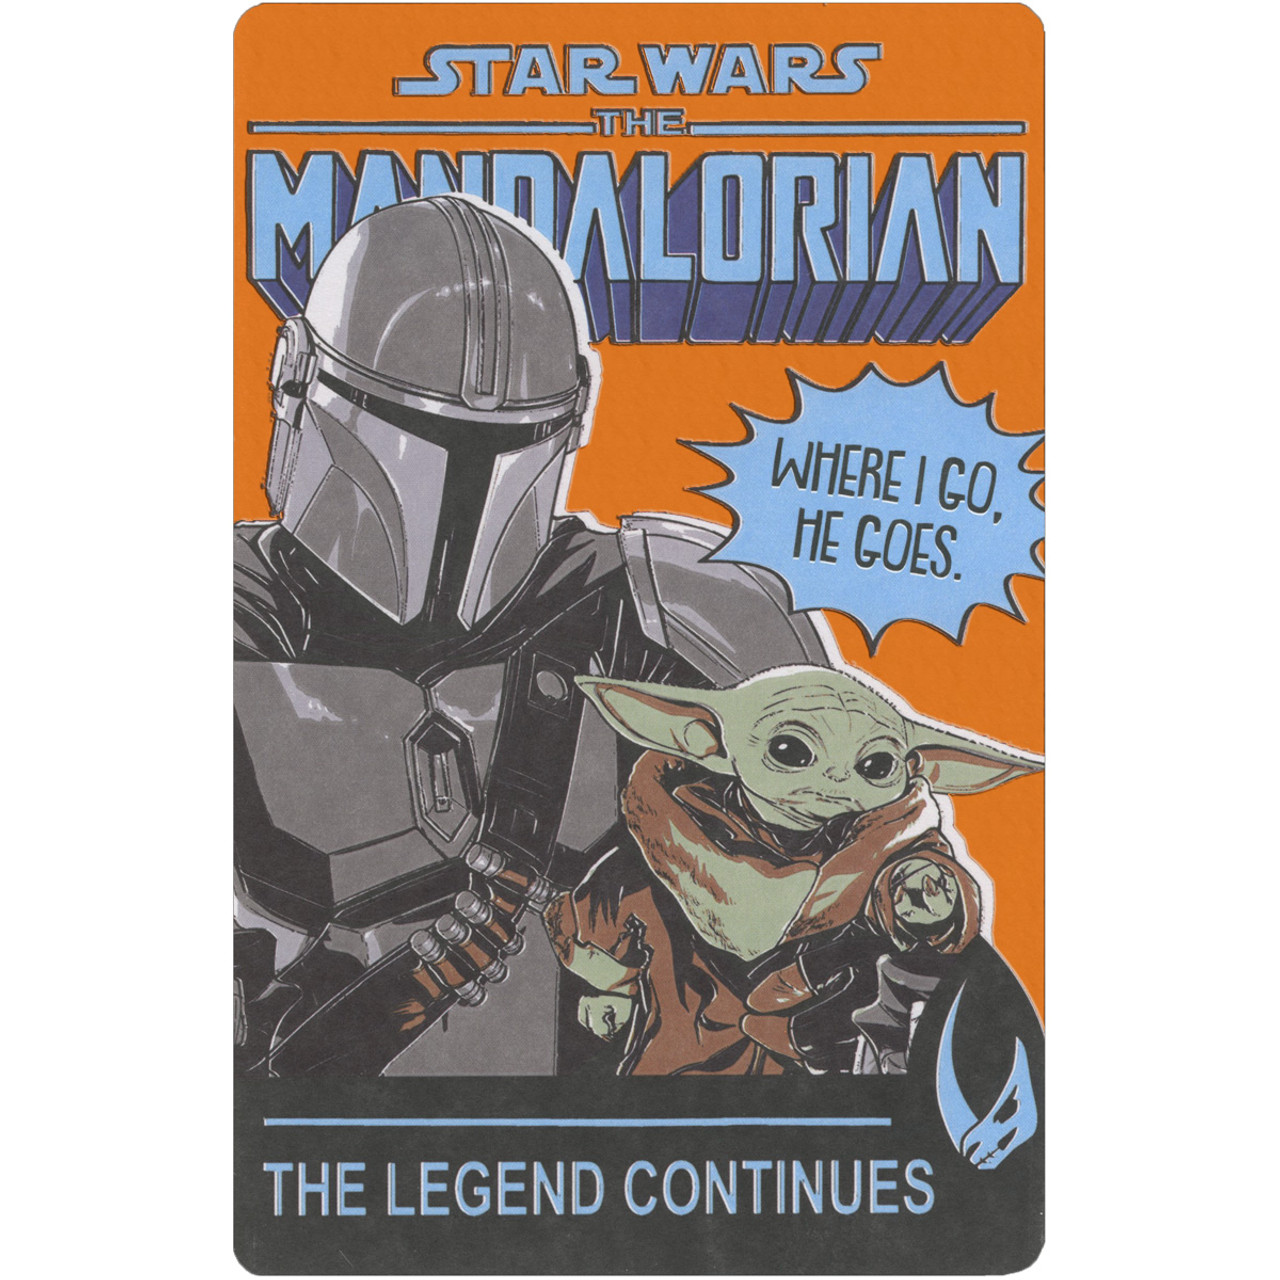 Star Wars: The Mandalorian and Baby Yoda / Grogu on Orange Foil Background  Father's Day Card for Dad